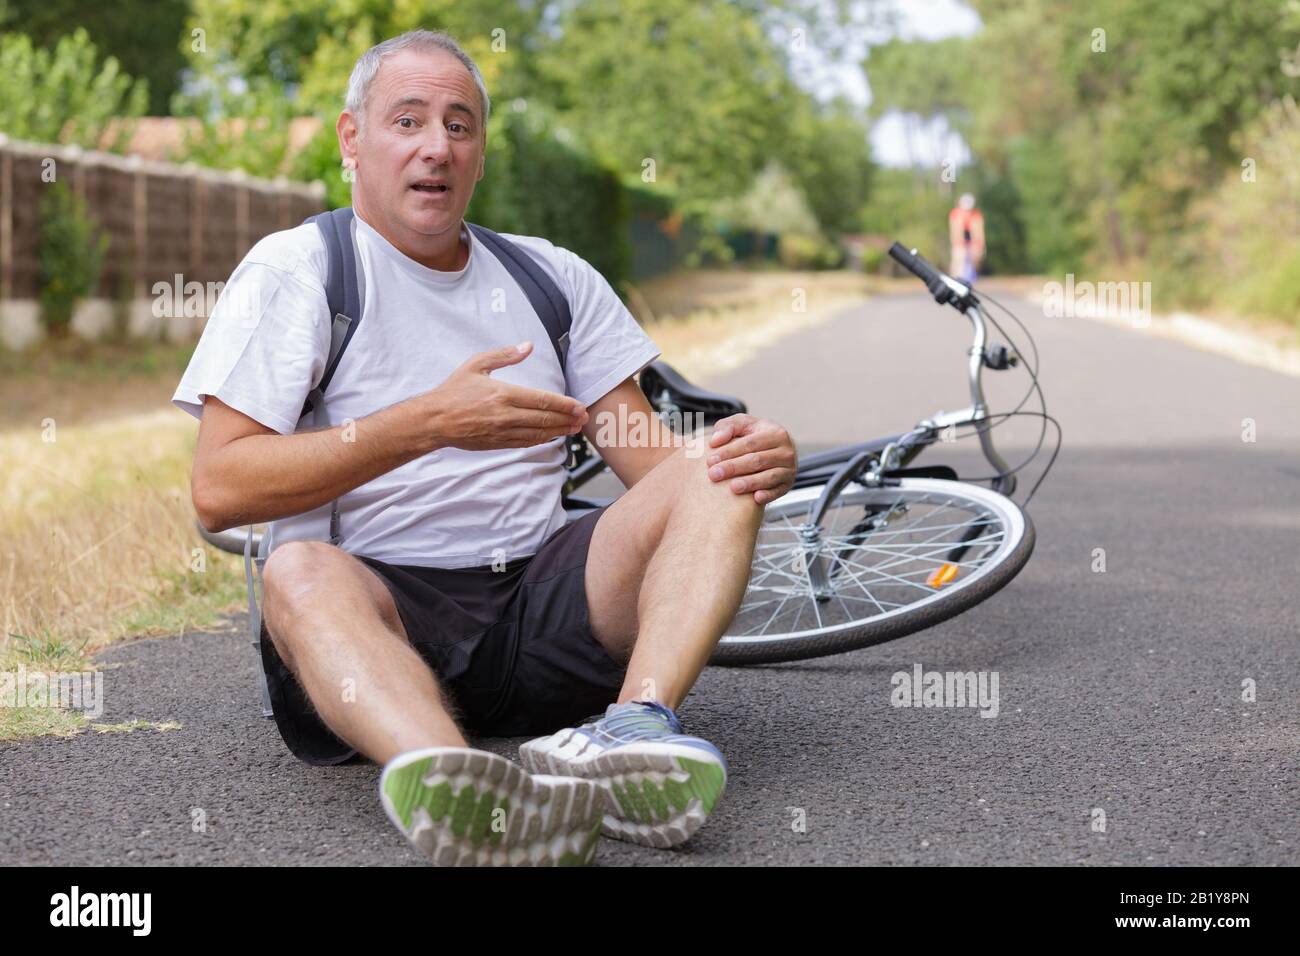 concept of a bike accident Stock Photo